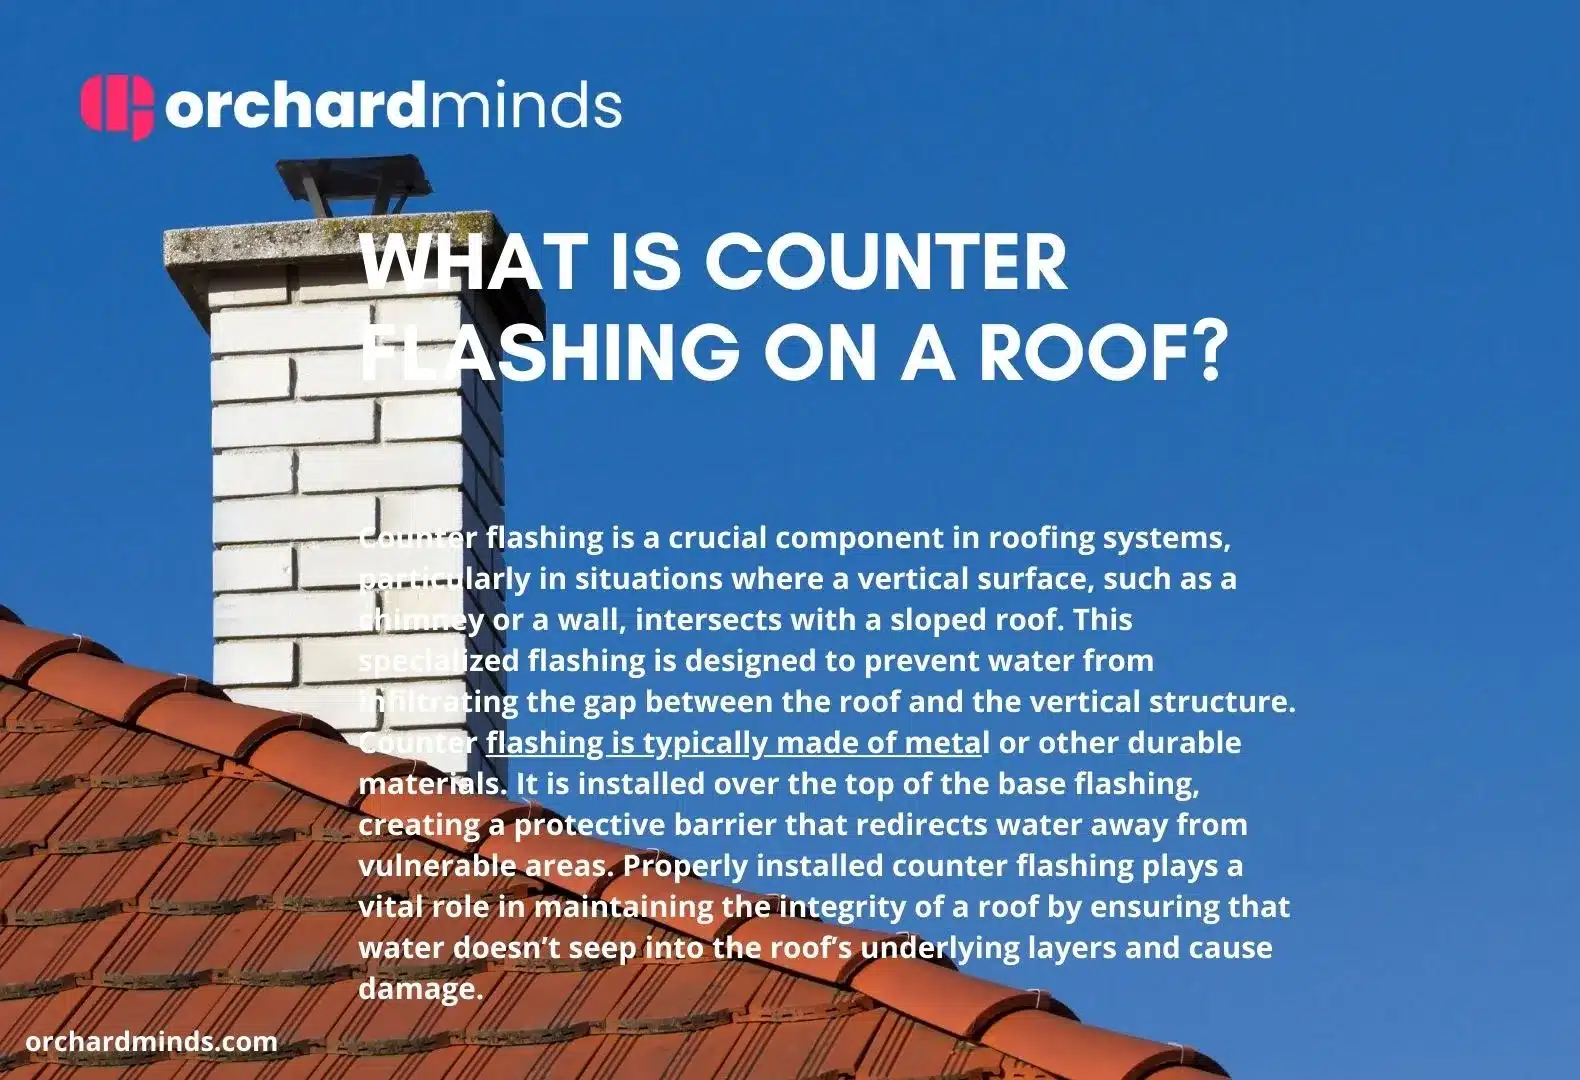 What is counter flashing on a roof